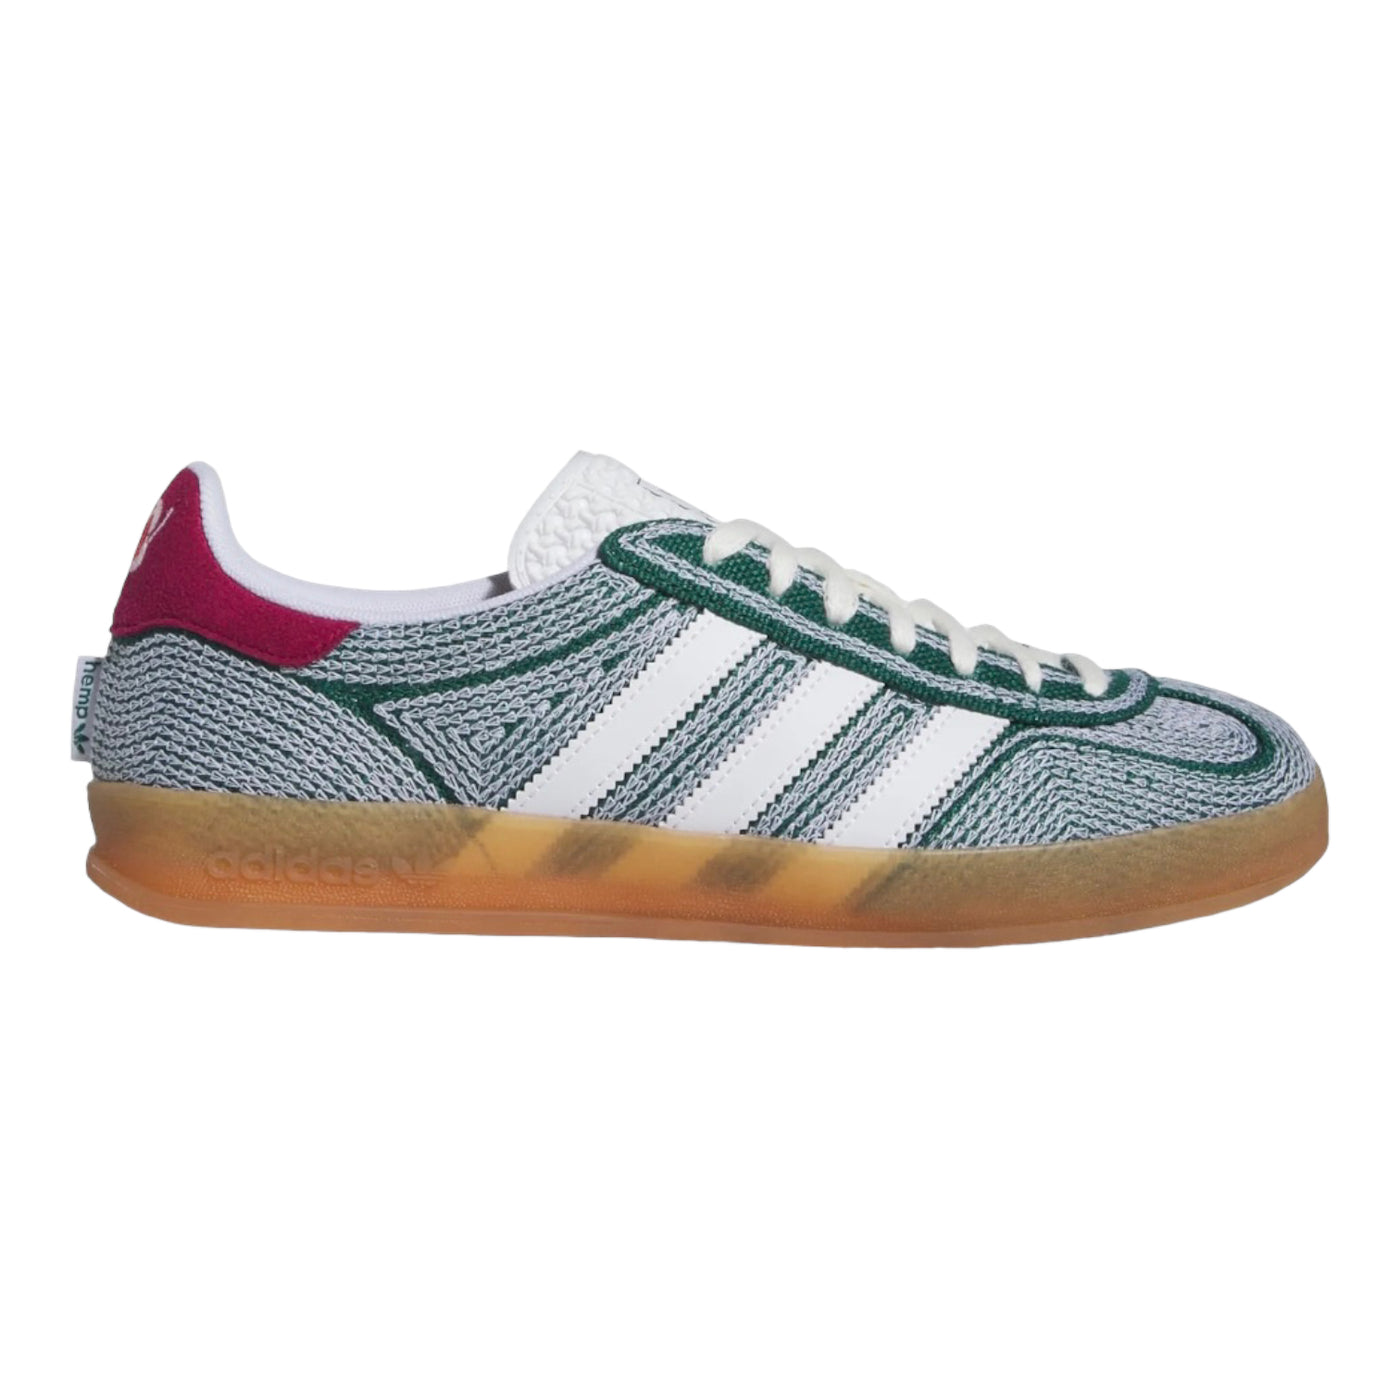 Adidas Sean Wotherspoon Gazelle Indoor Shoes